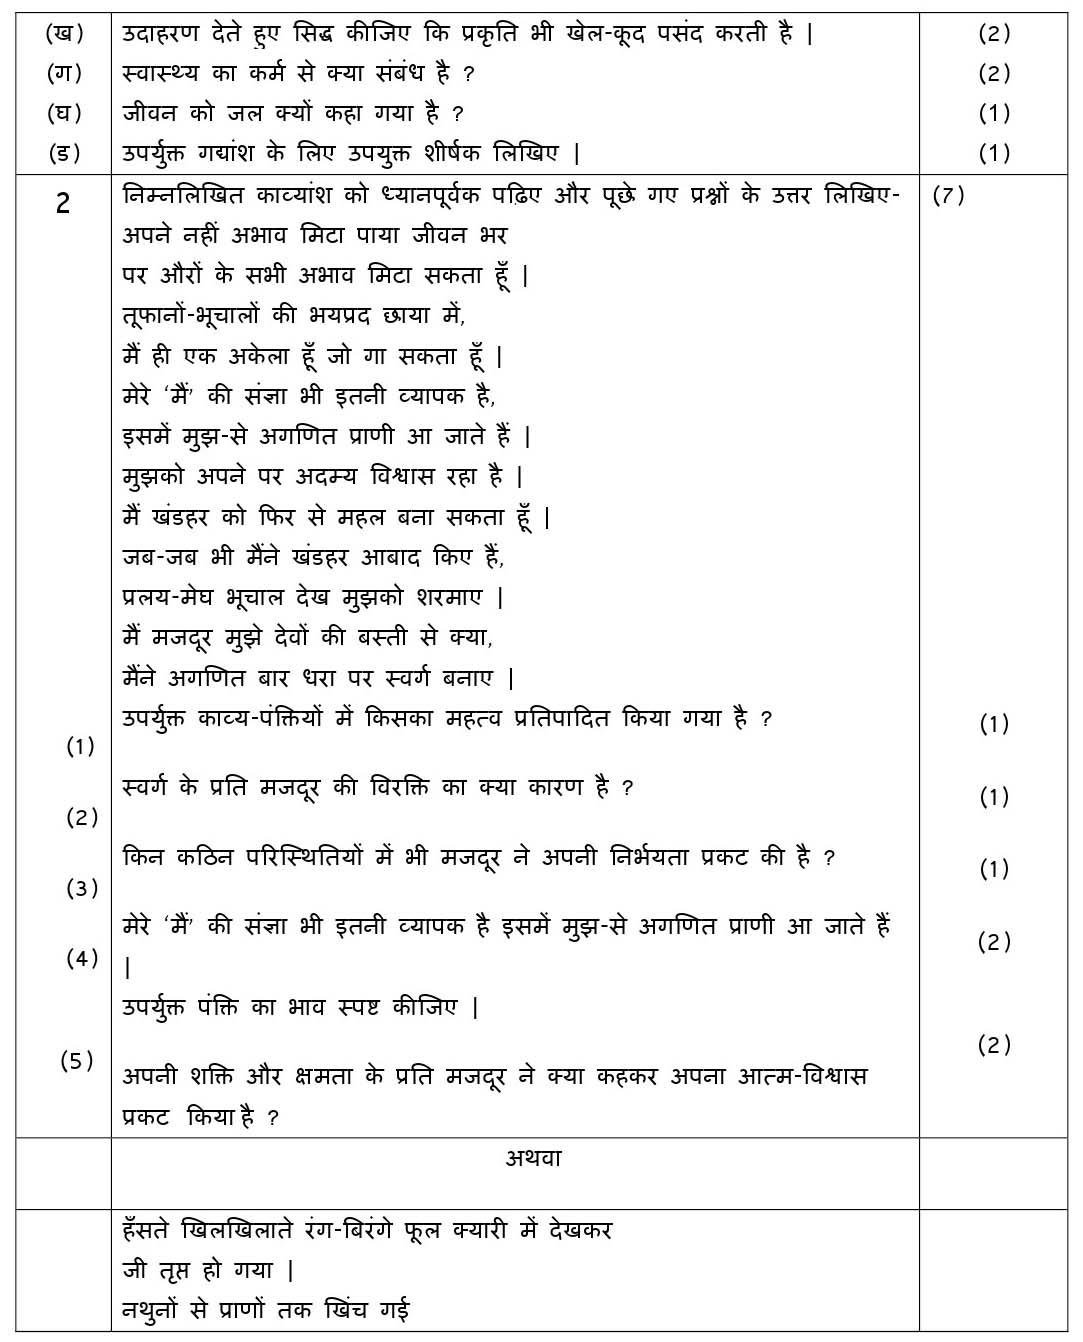 Hindi A CBSE Class X Sample Question Paper 2018-19 - Image 2